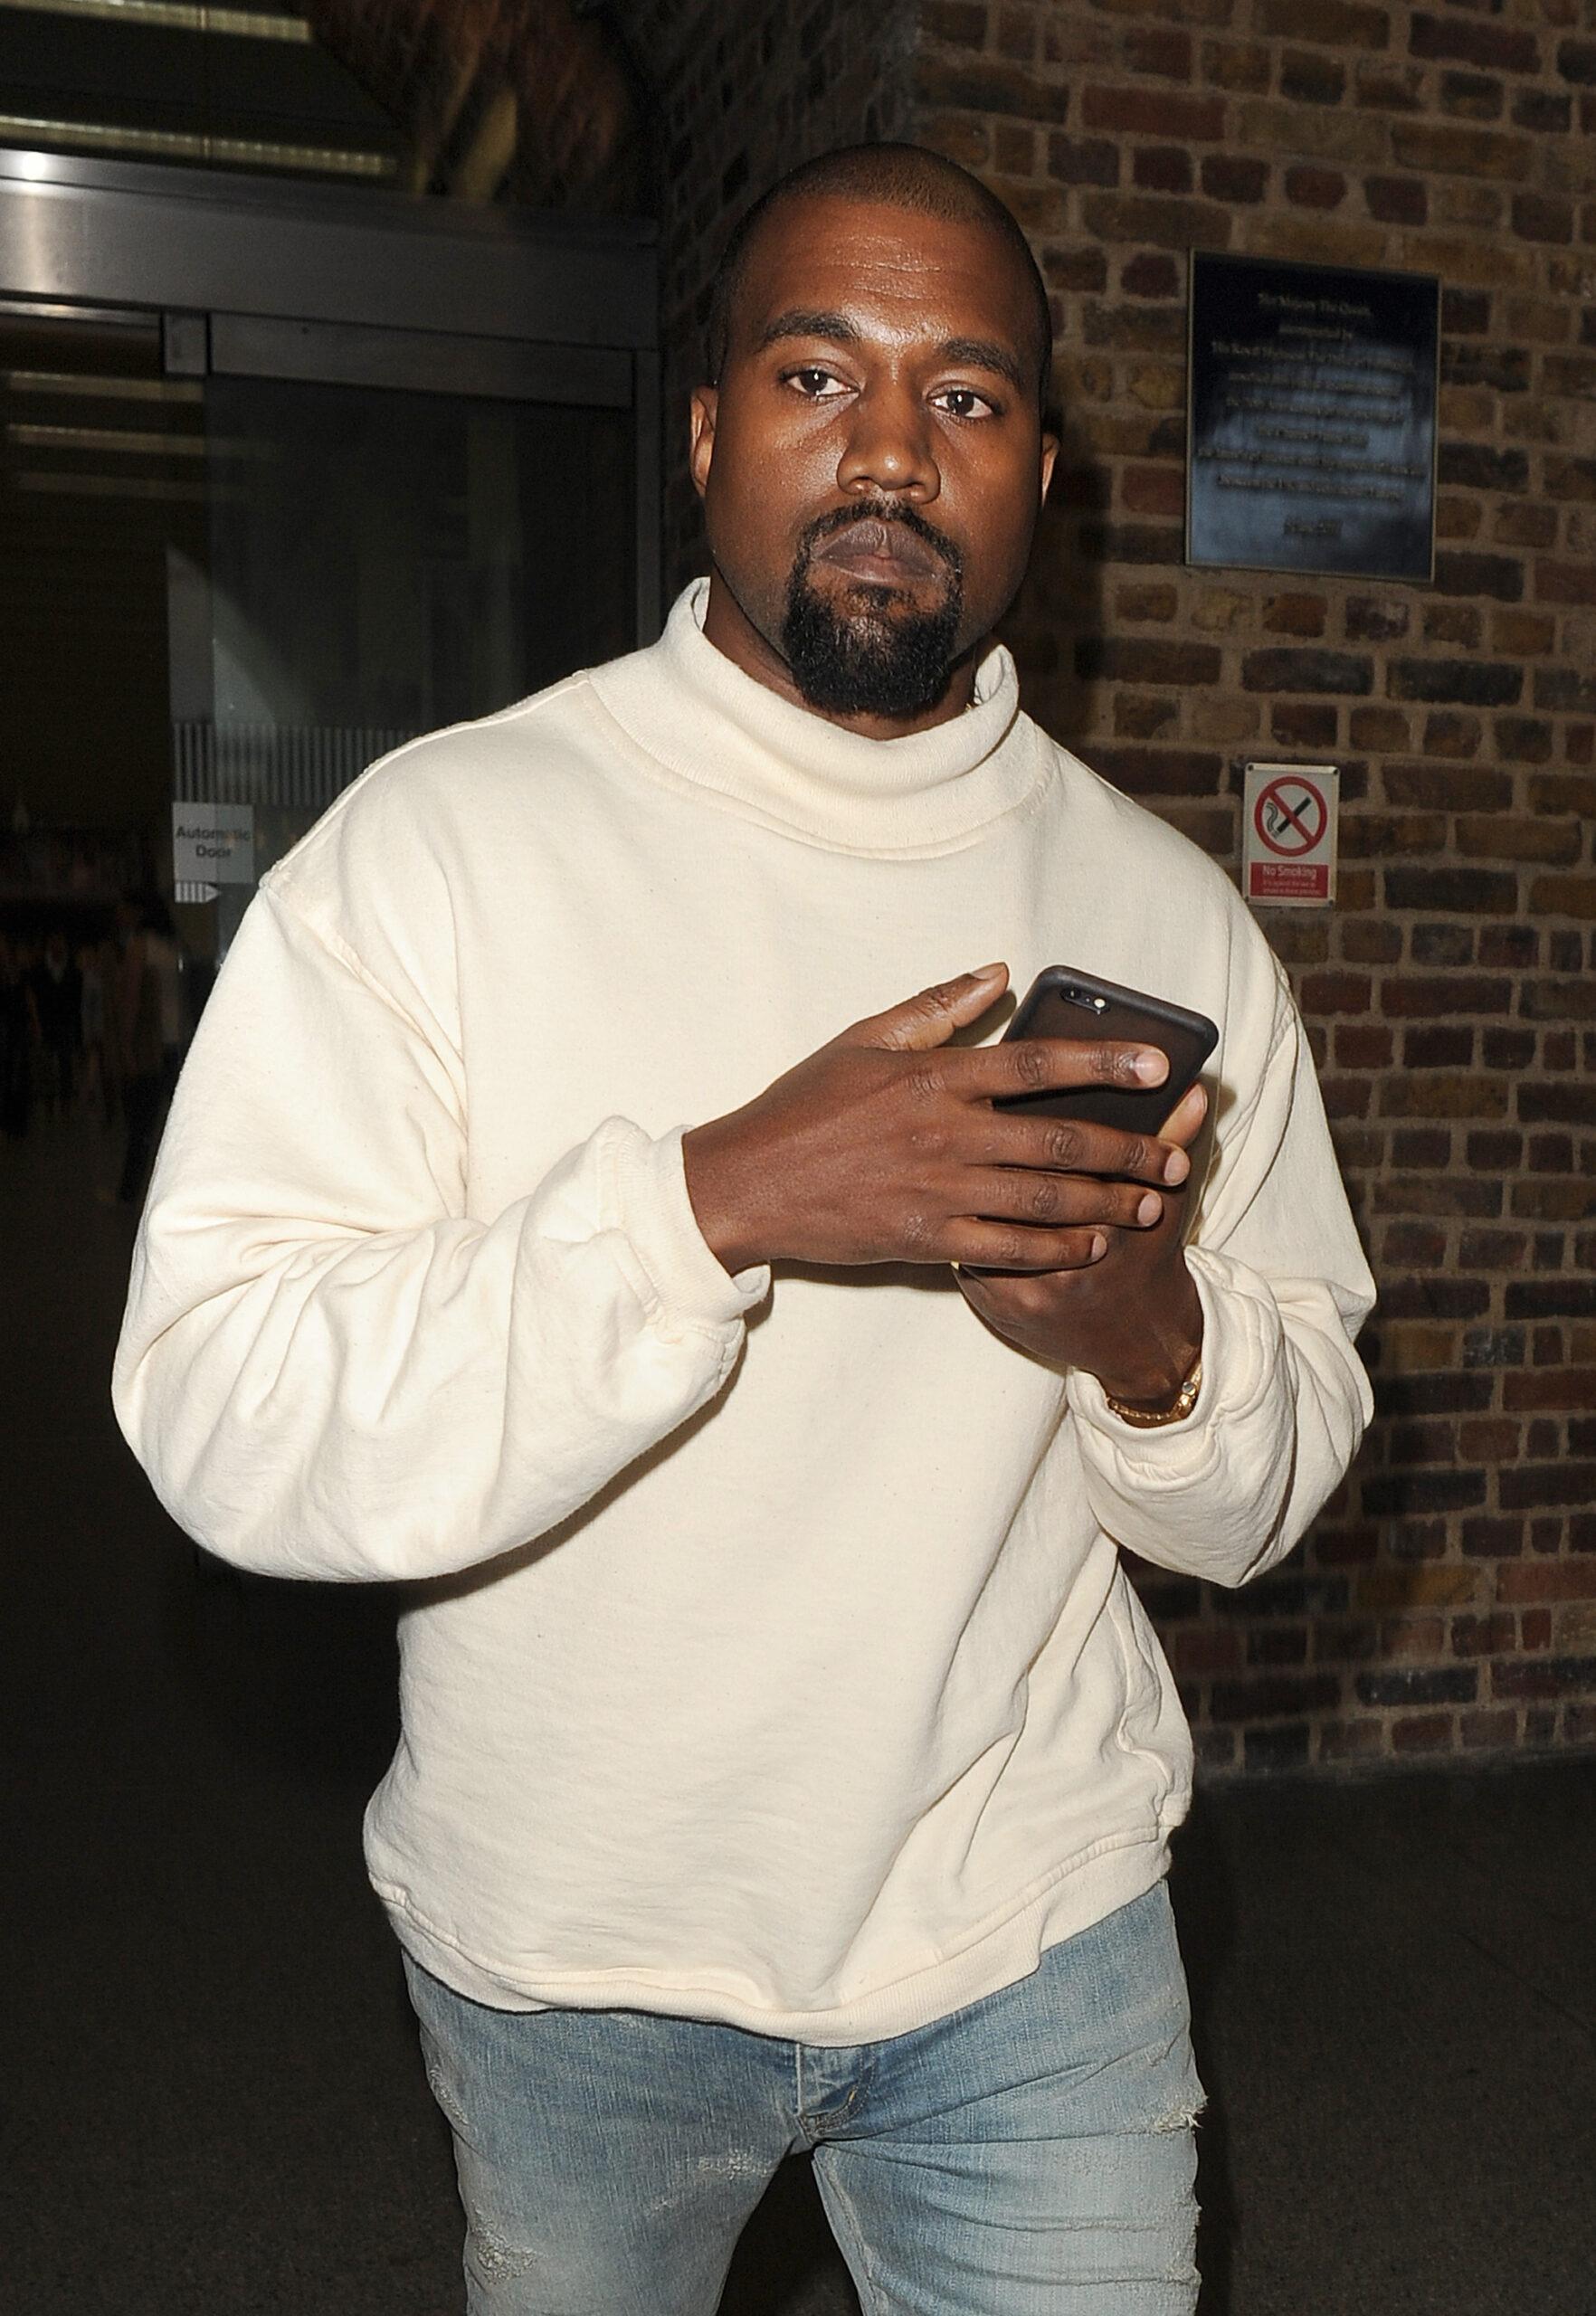 Kanye West might be suspect in a battery investigation